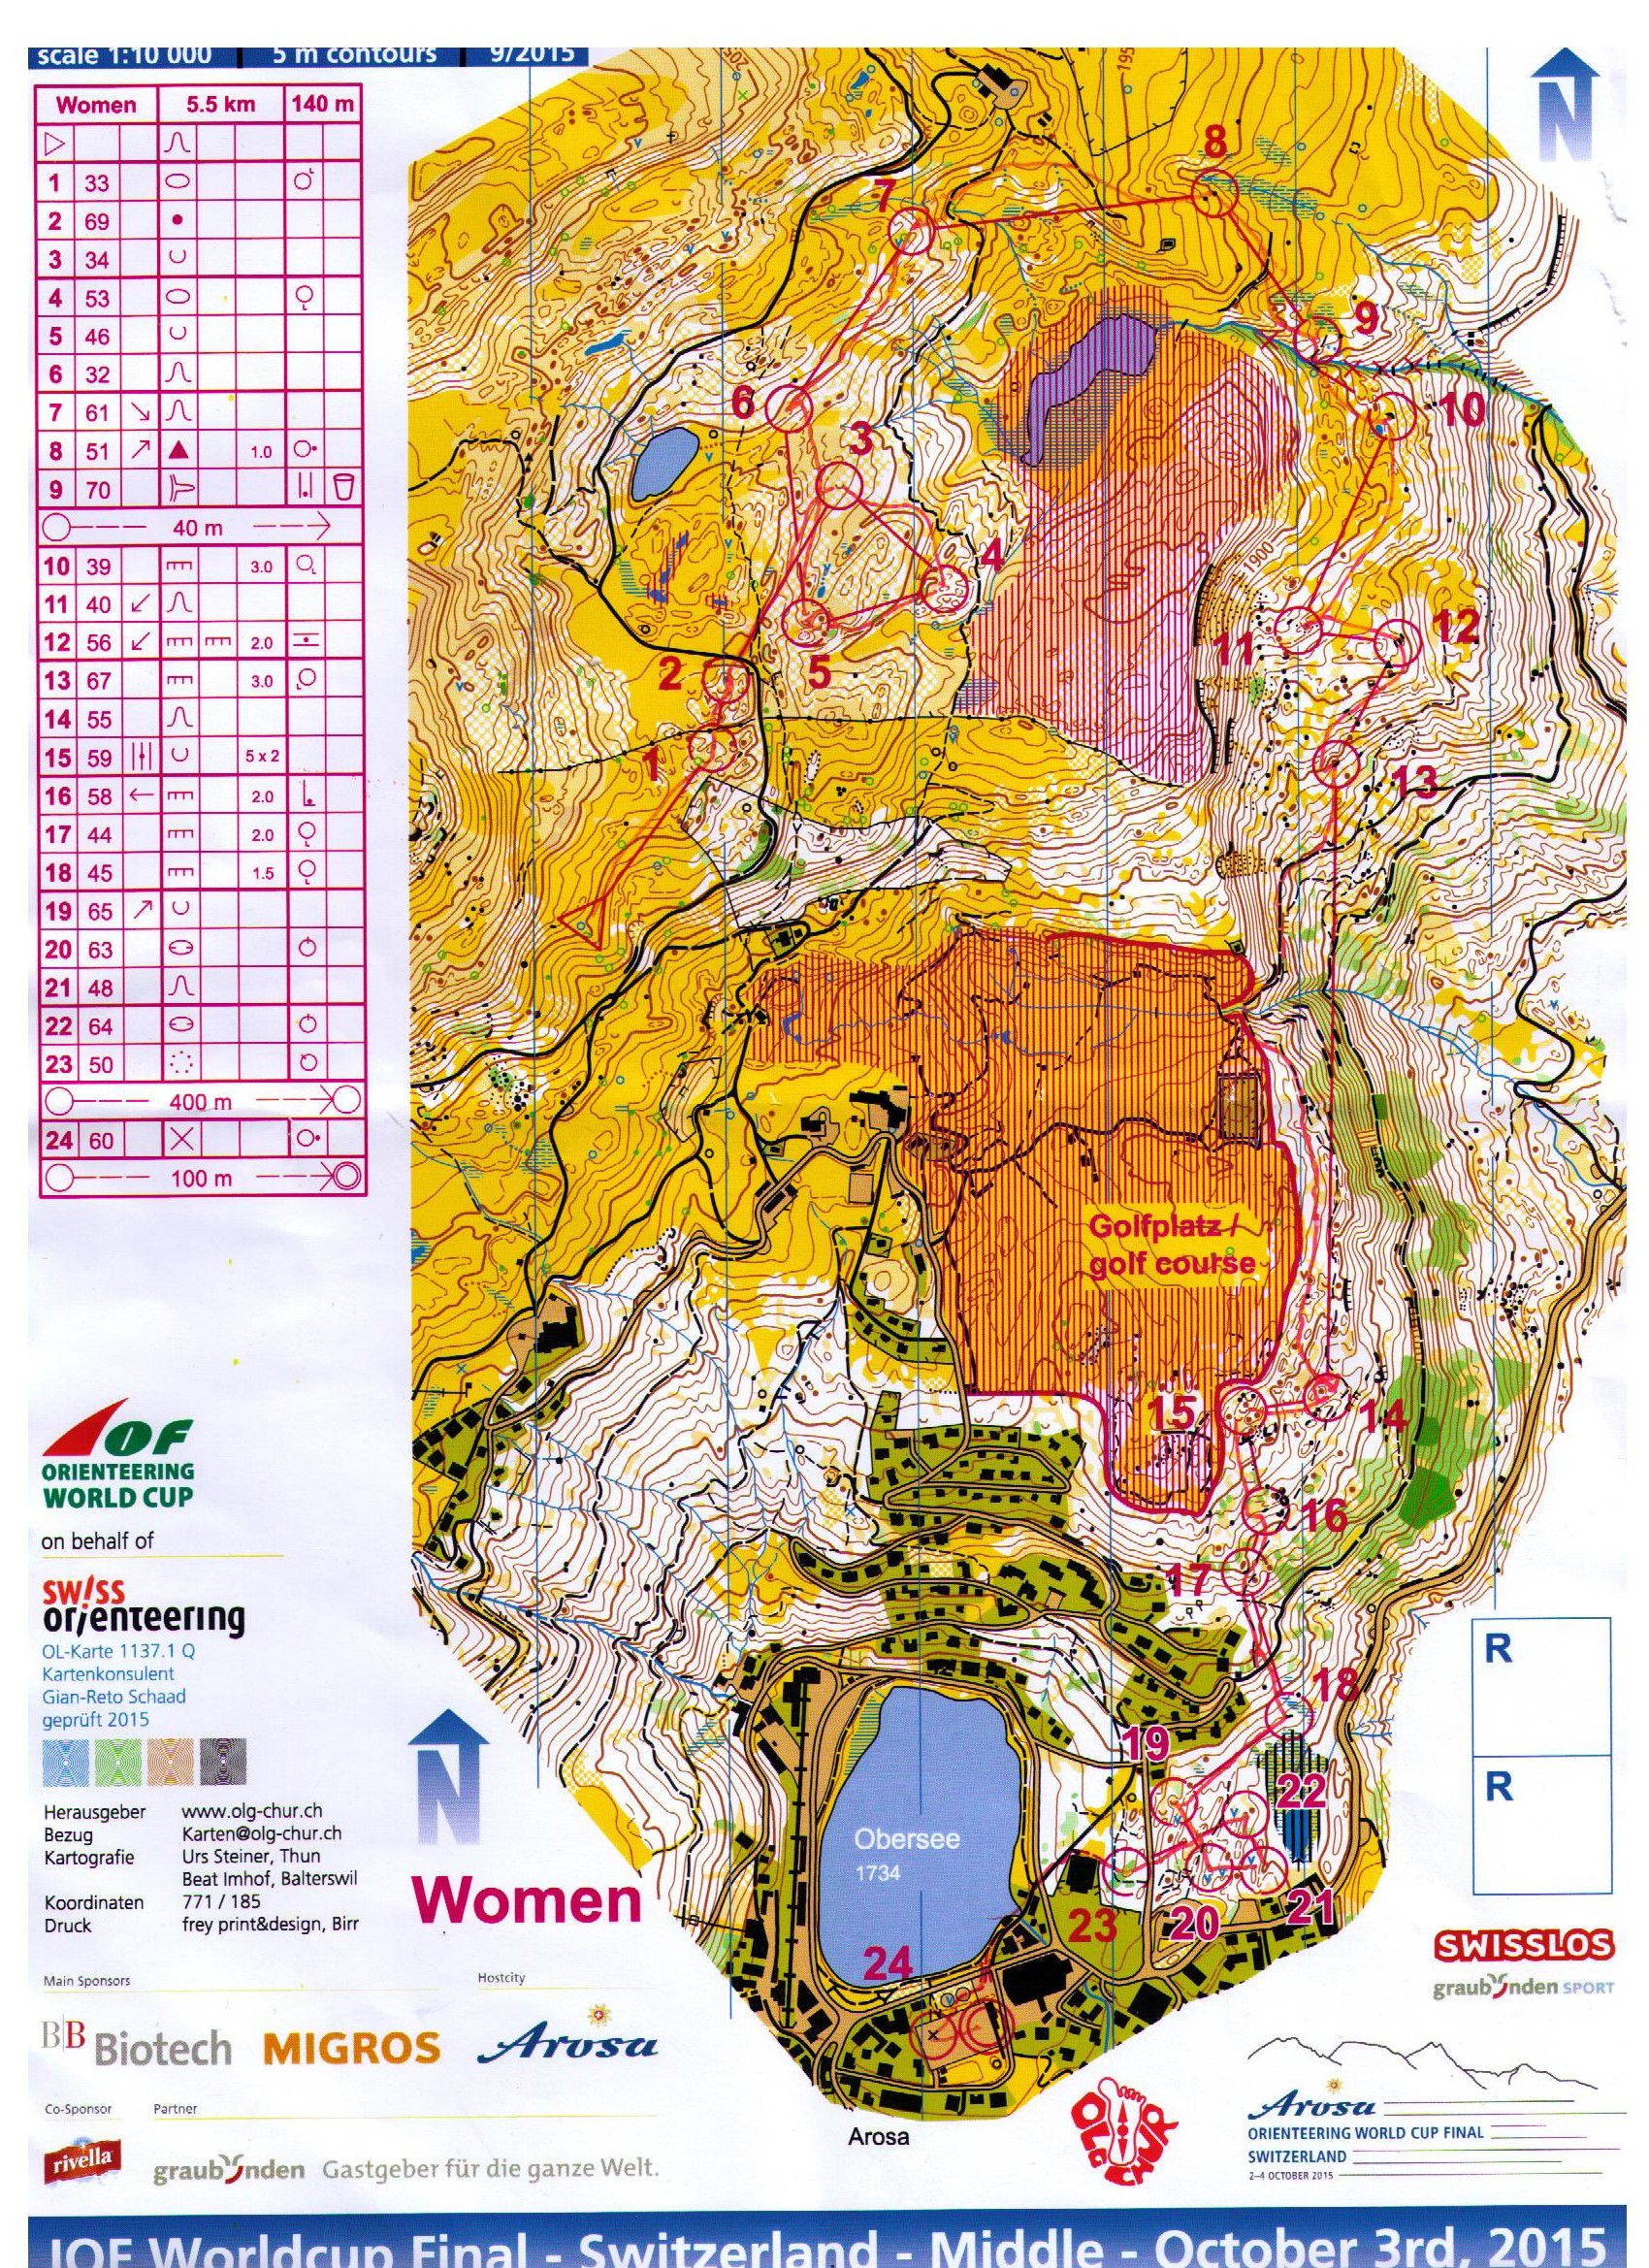 World Cup Arosa - middle (03/10/2015)